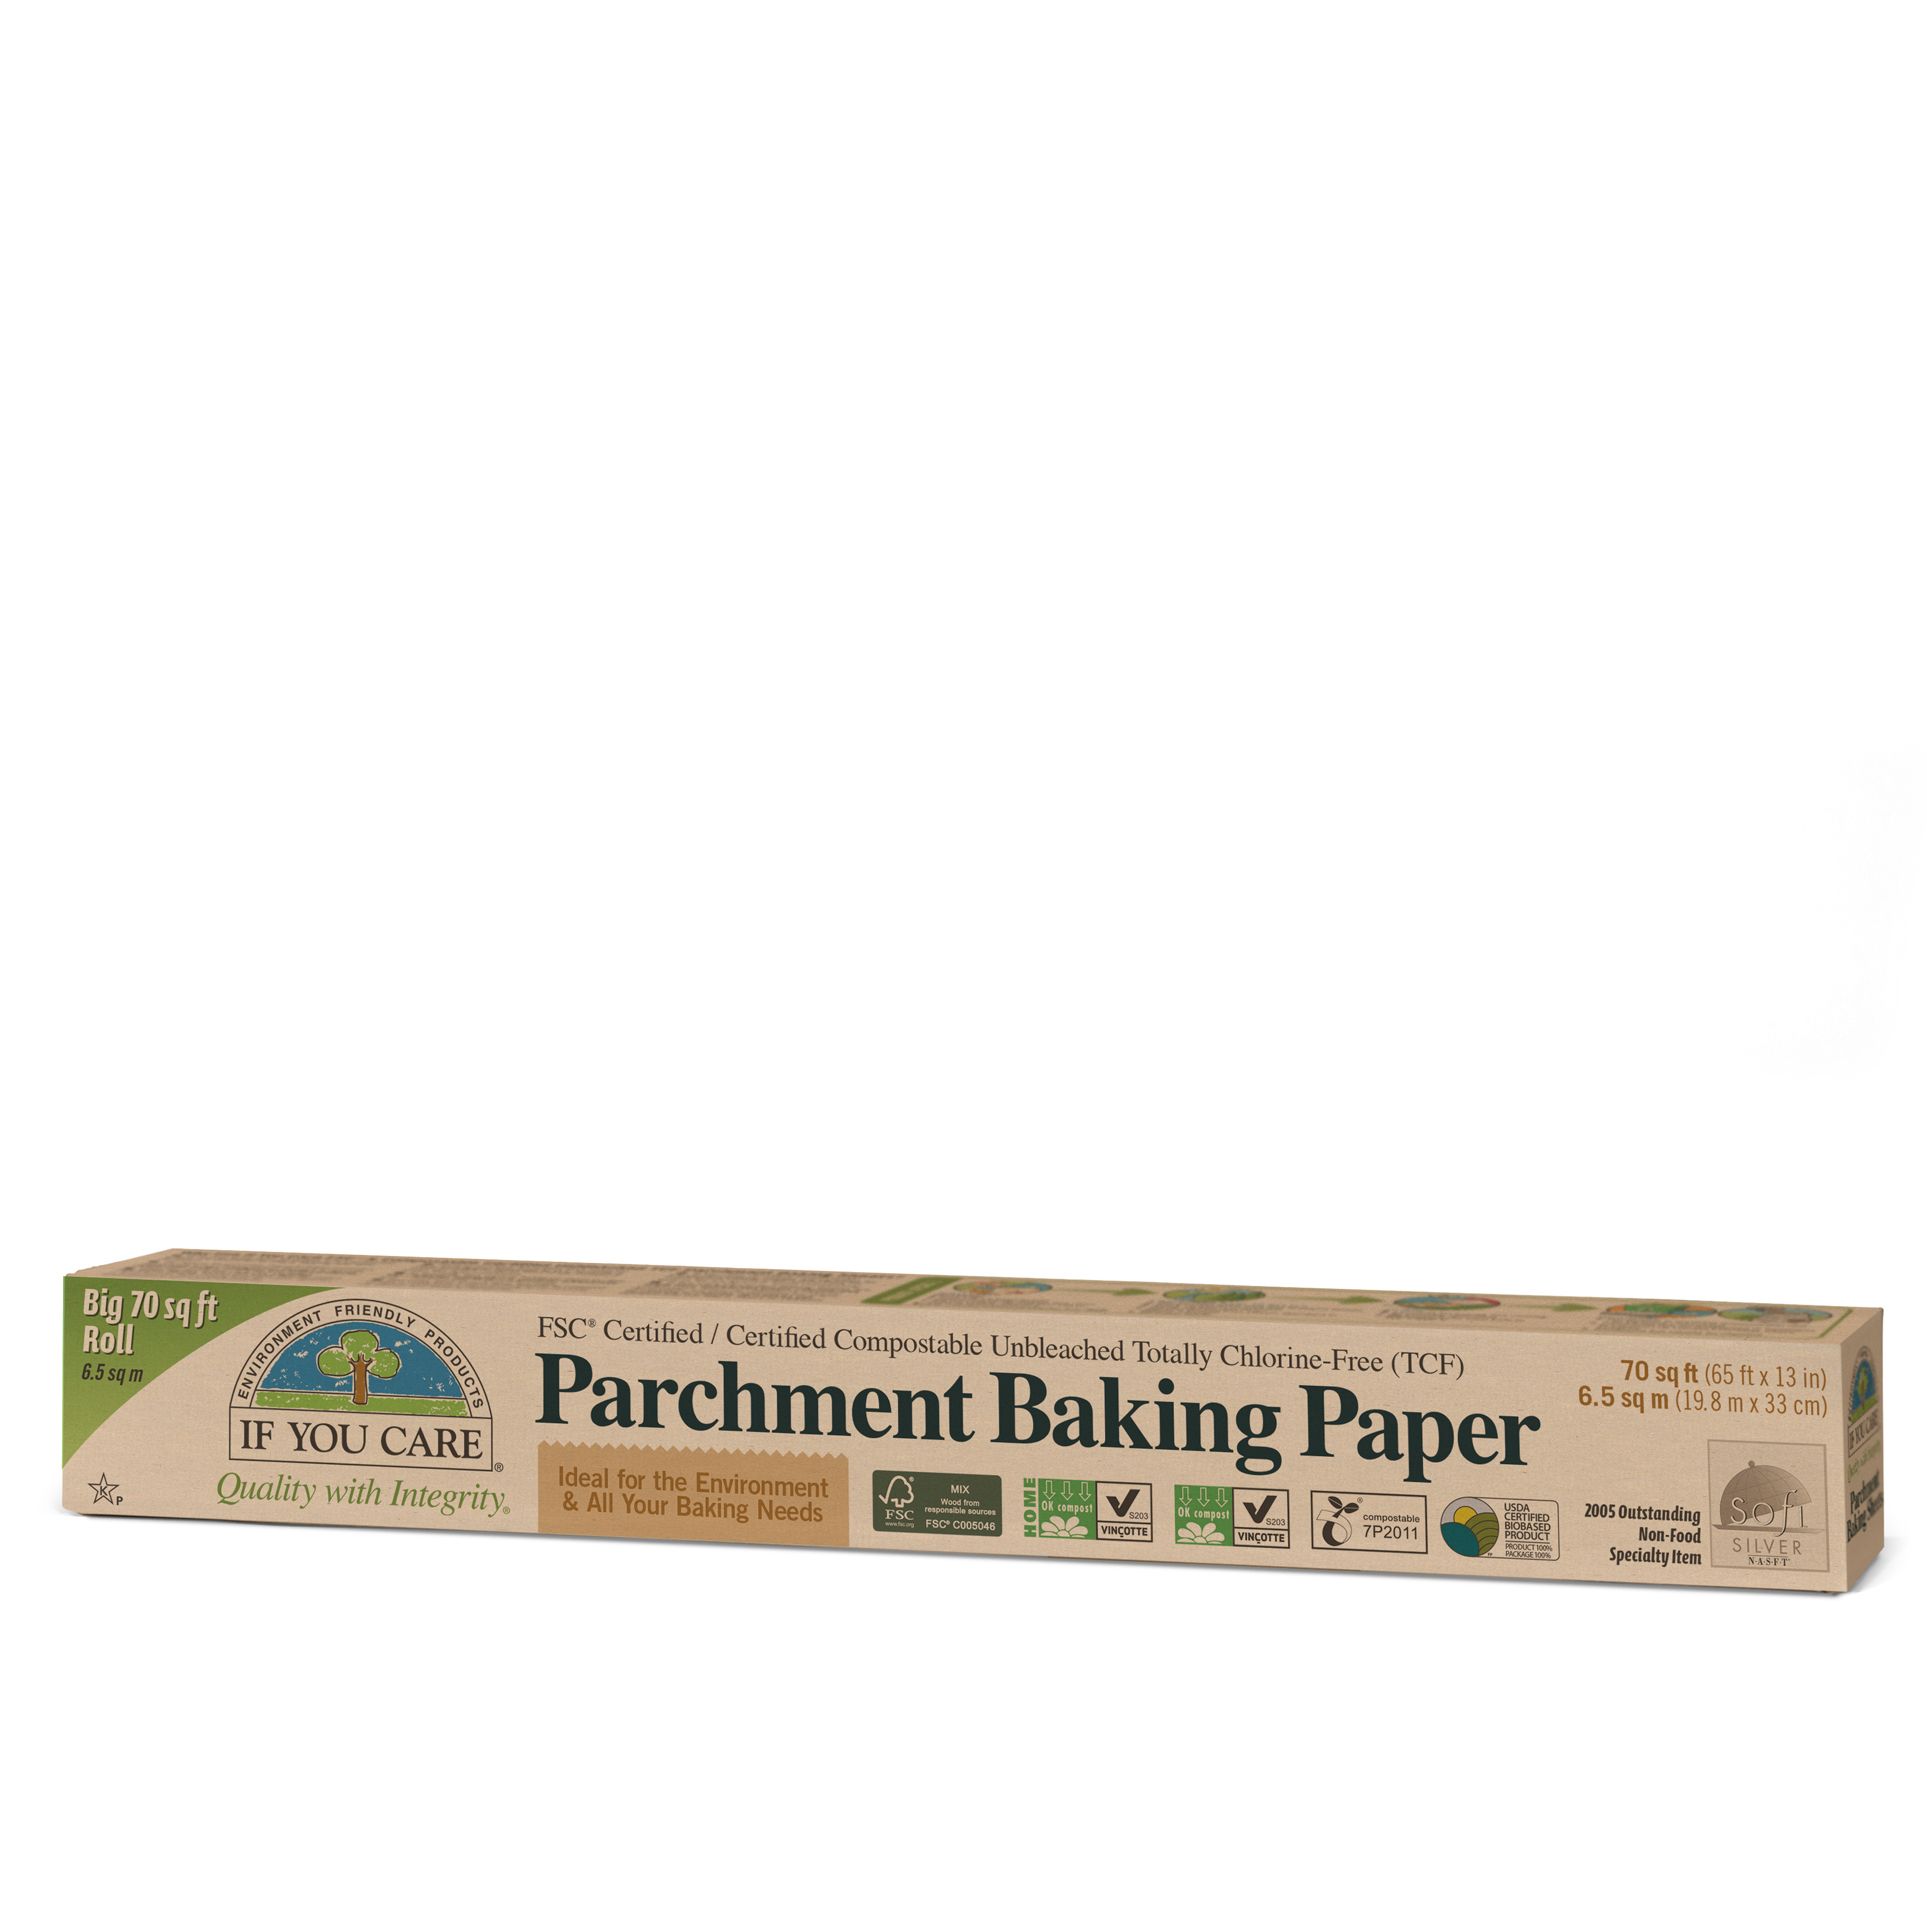 For Good FSC Certified Parchment Paper Roll - 70sq ft - Non-Toxic